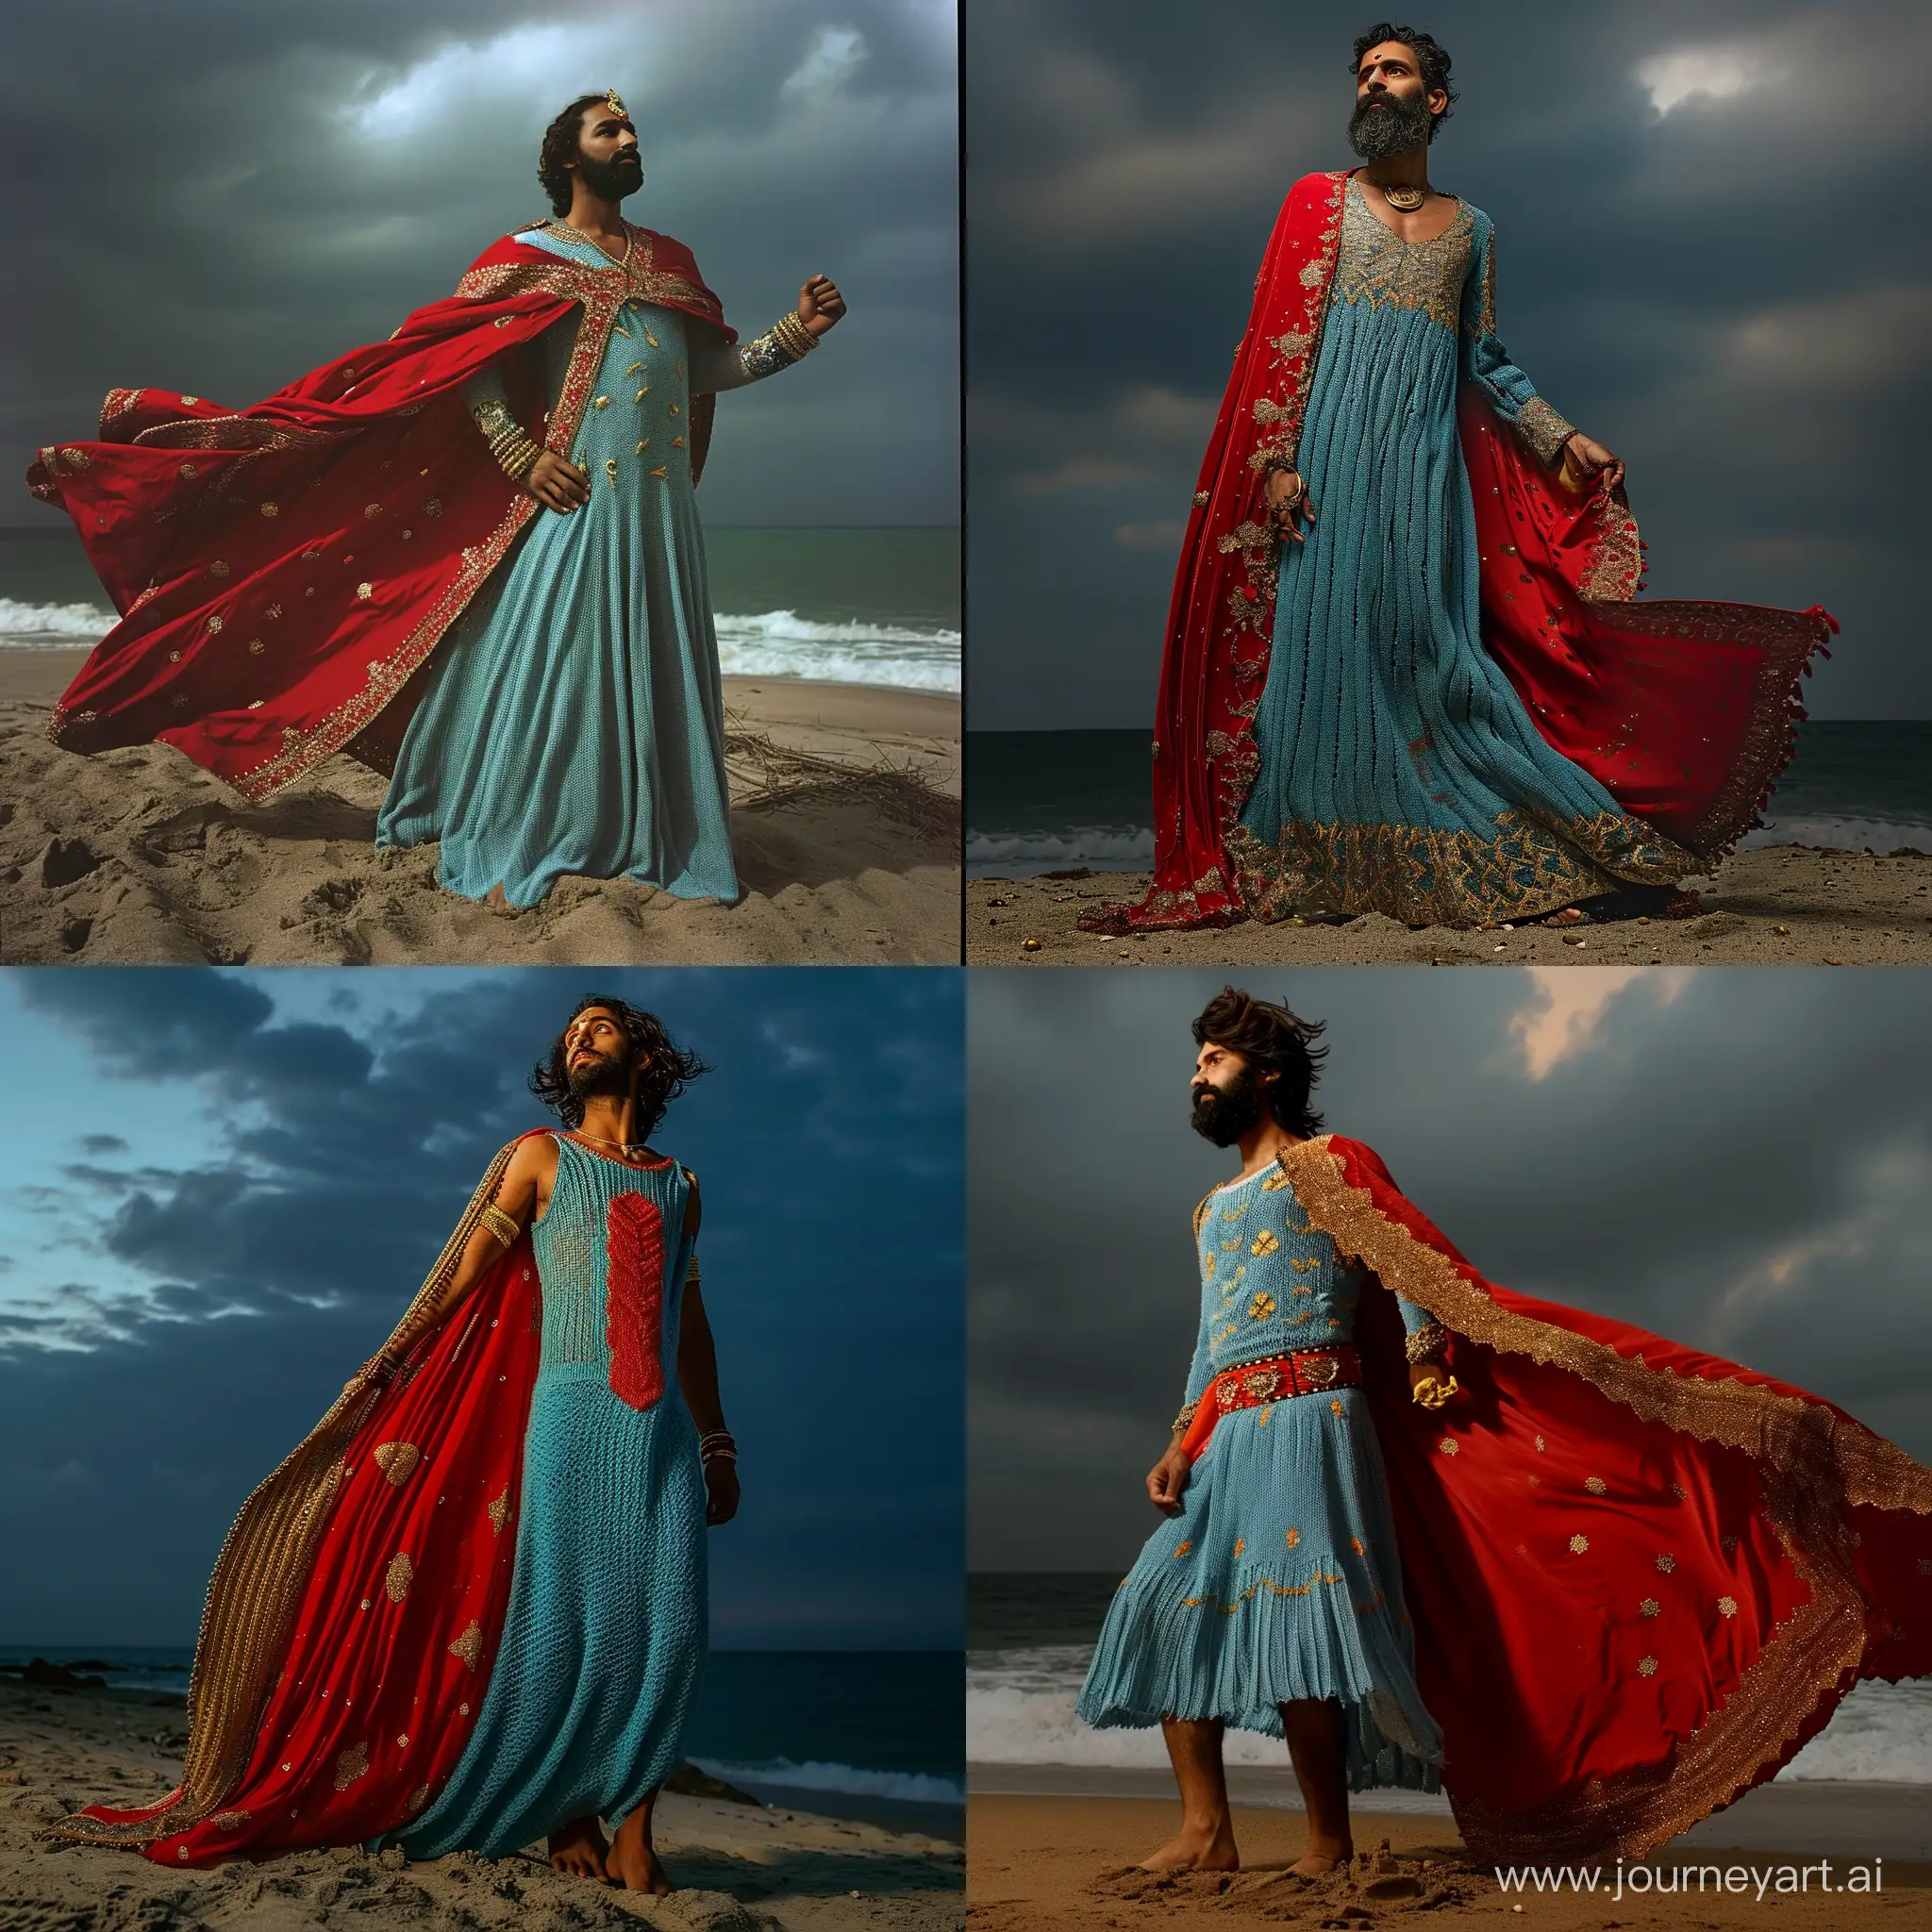  hippie  men india in knitted bleu dress  with red cape with gold on the beach with dark sky